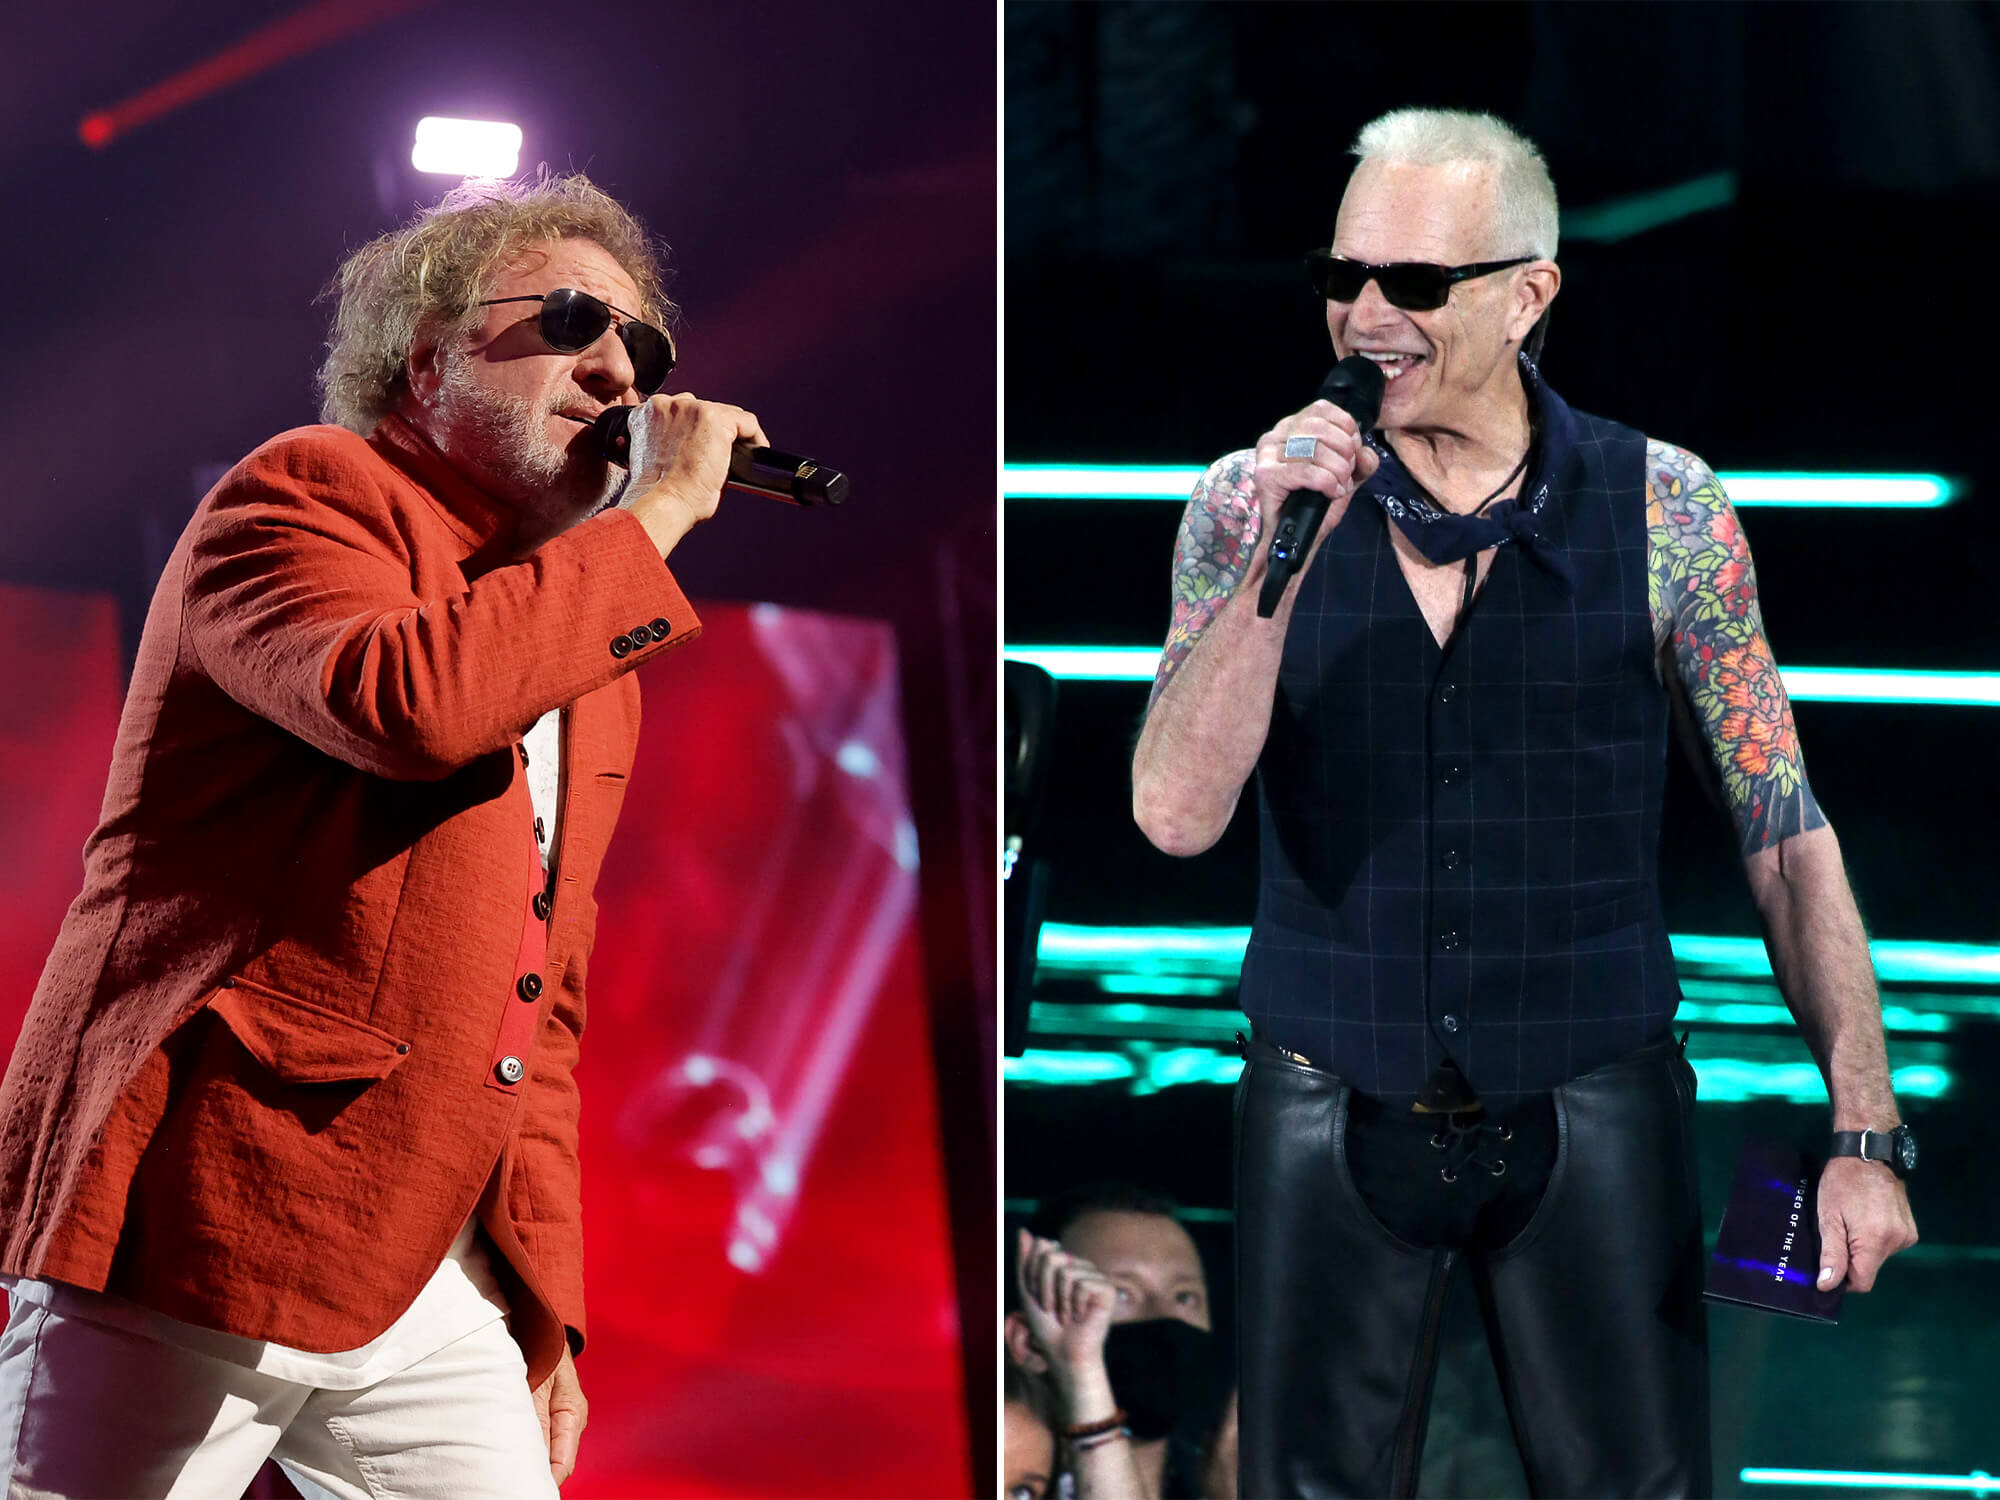 Sammy Hagar and David Lee Roth. Both are on stage and have microphones in hand.